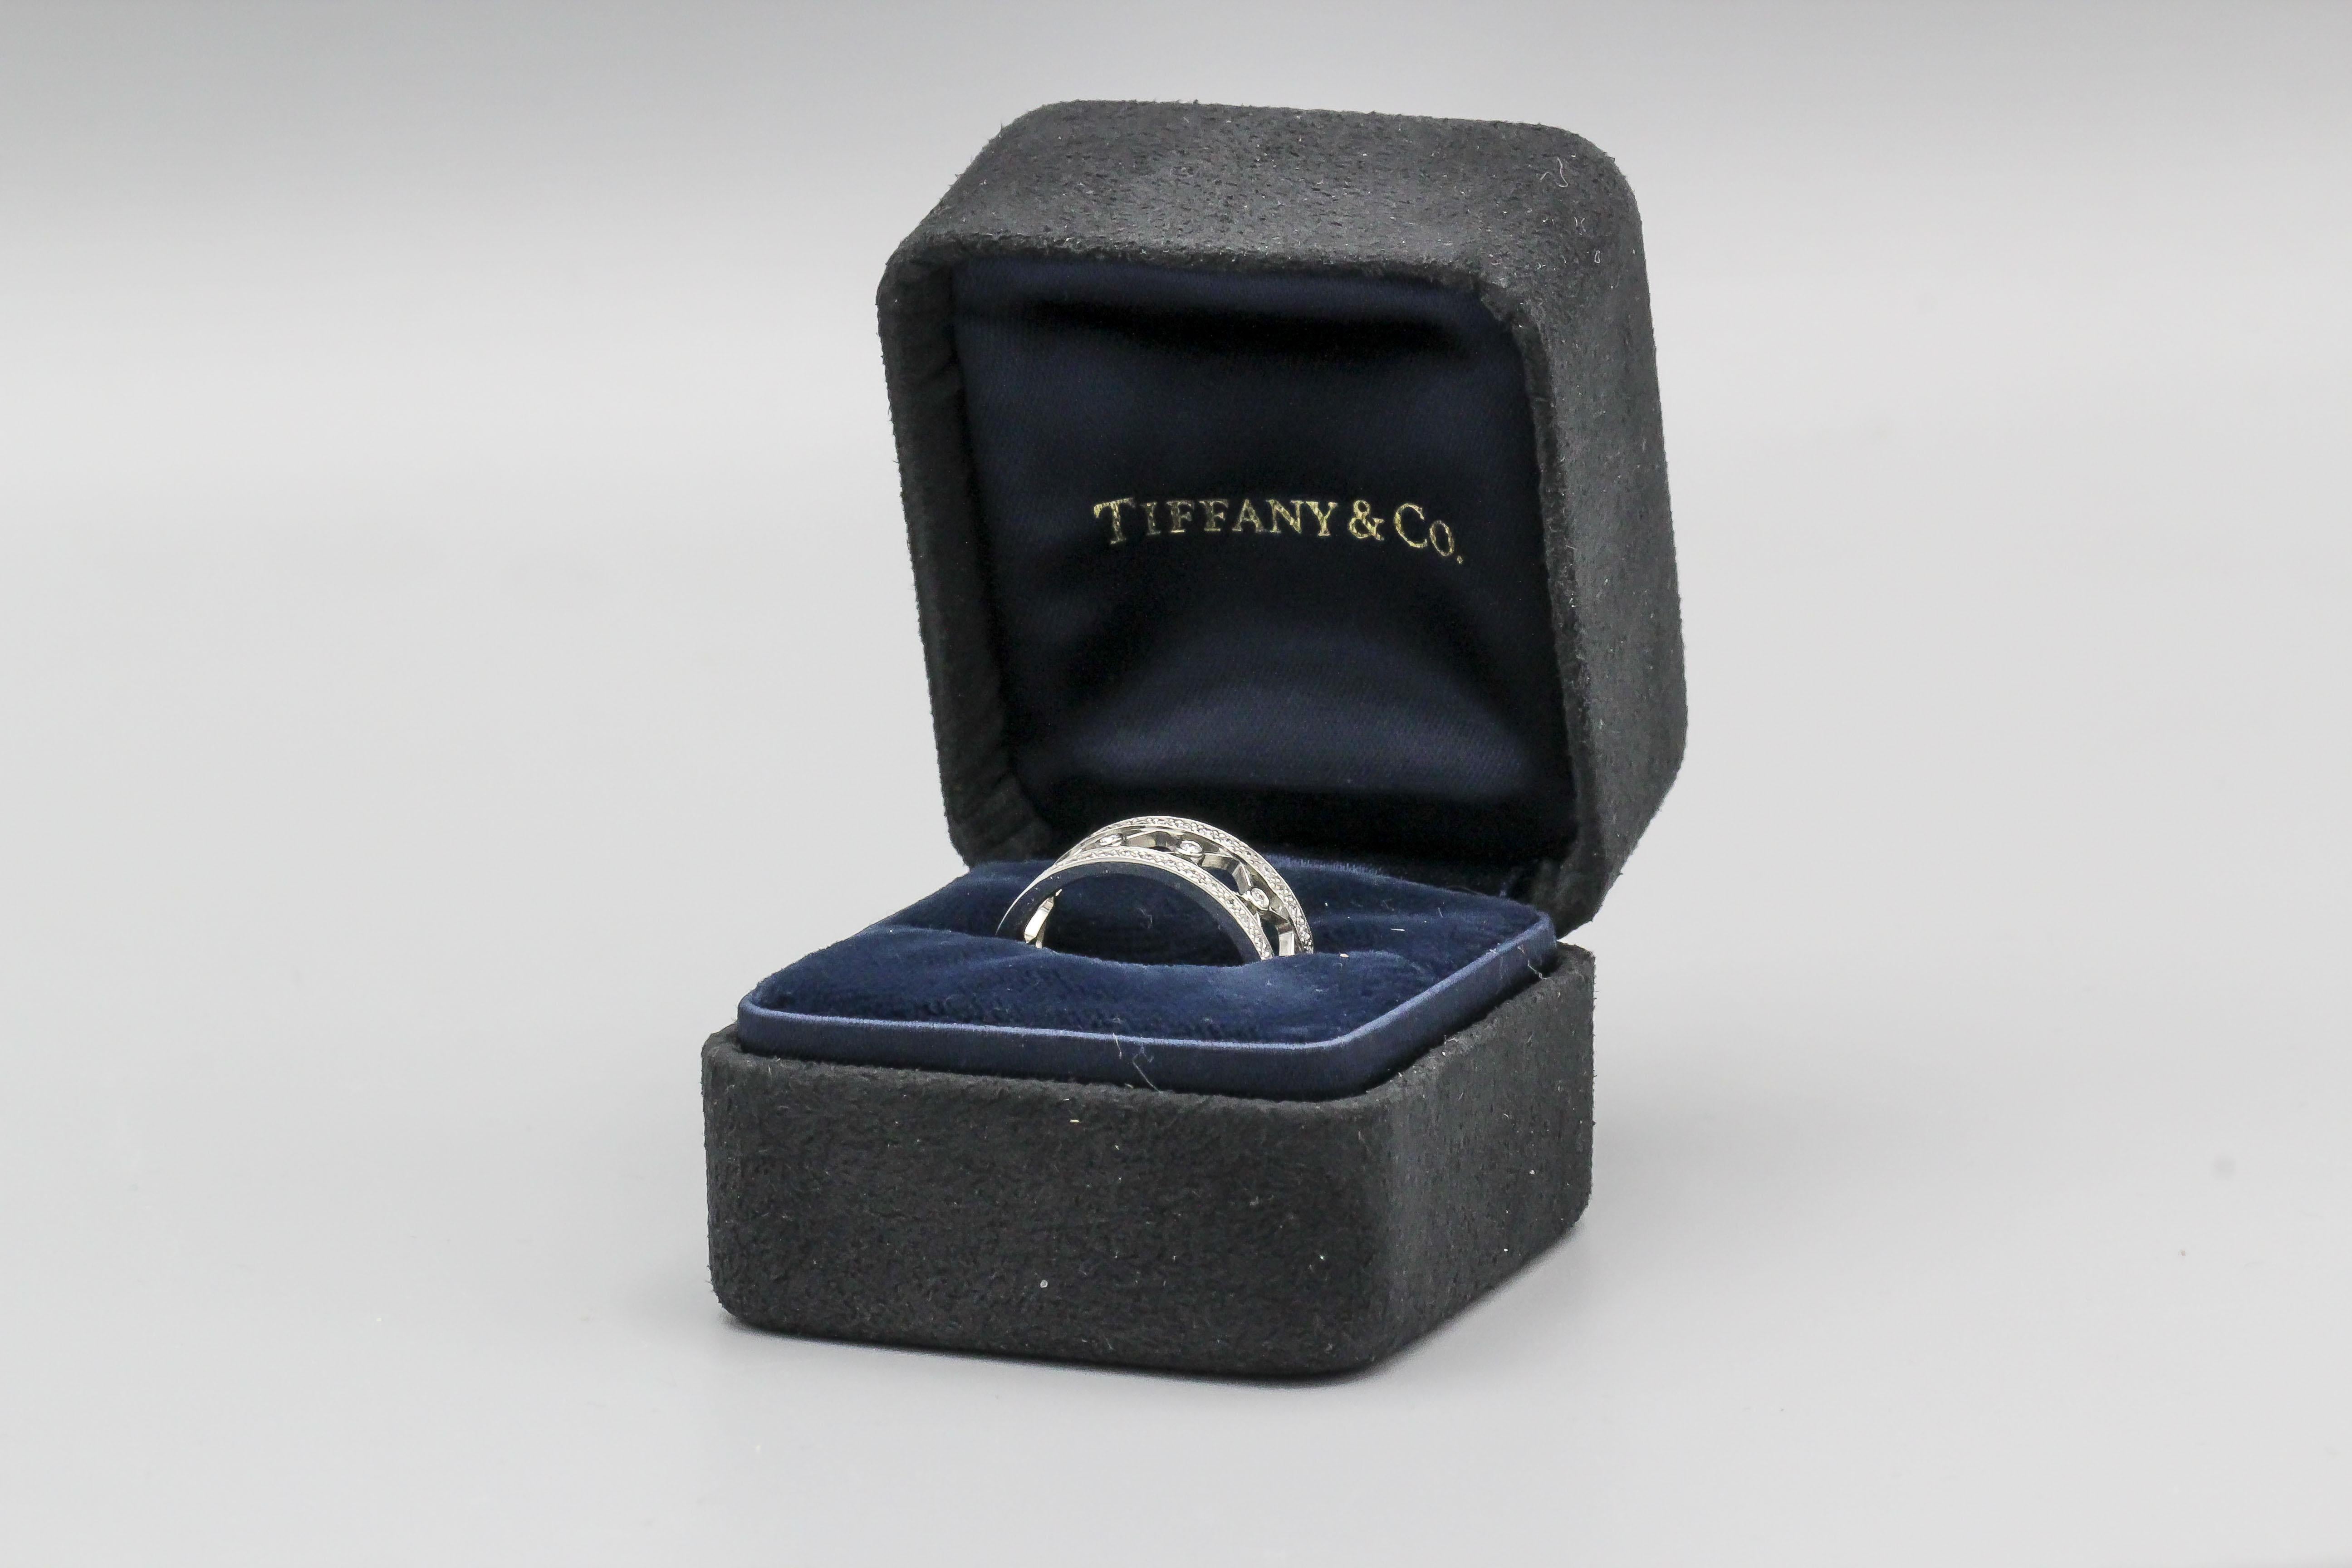 Tiffany & Co. Voile Diamond and Platinum Band Ring sz. 5.25 In Good Condition For Sale In Bellmore, NY